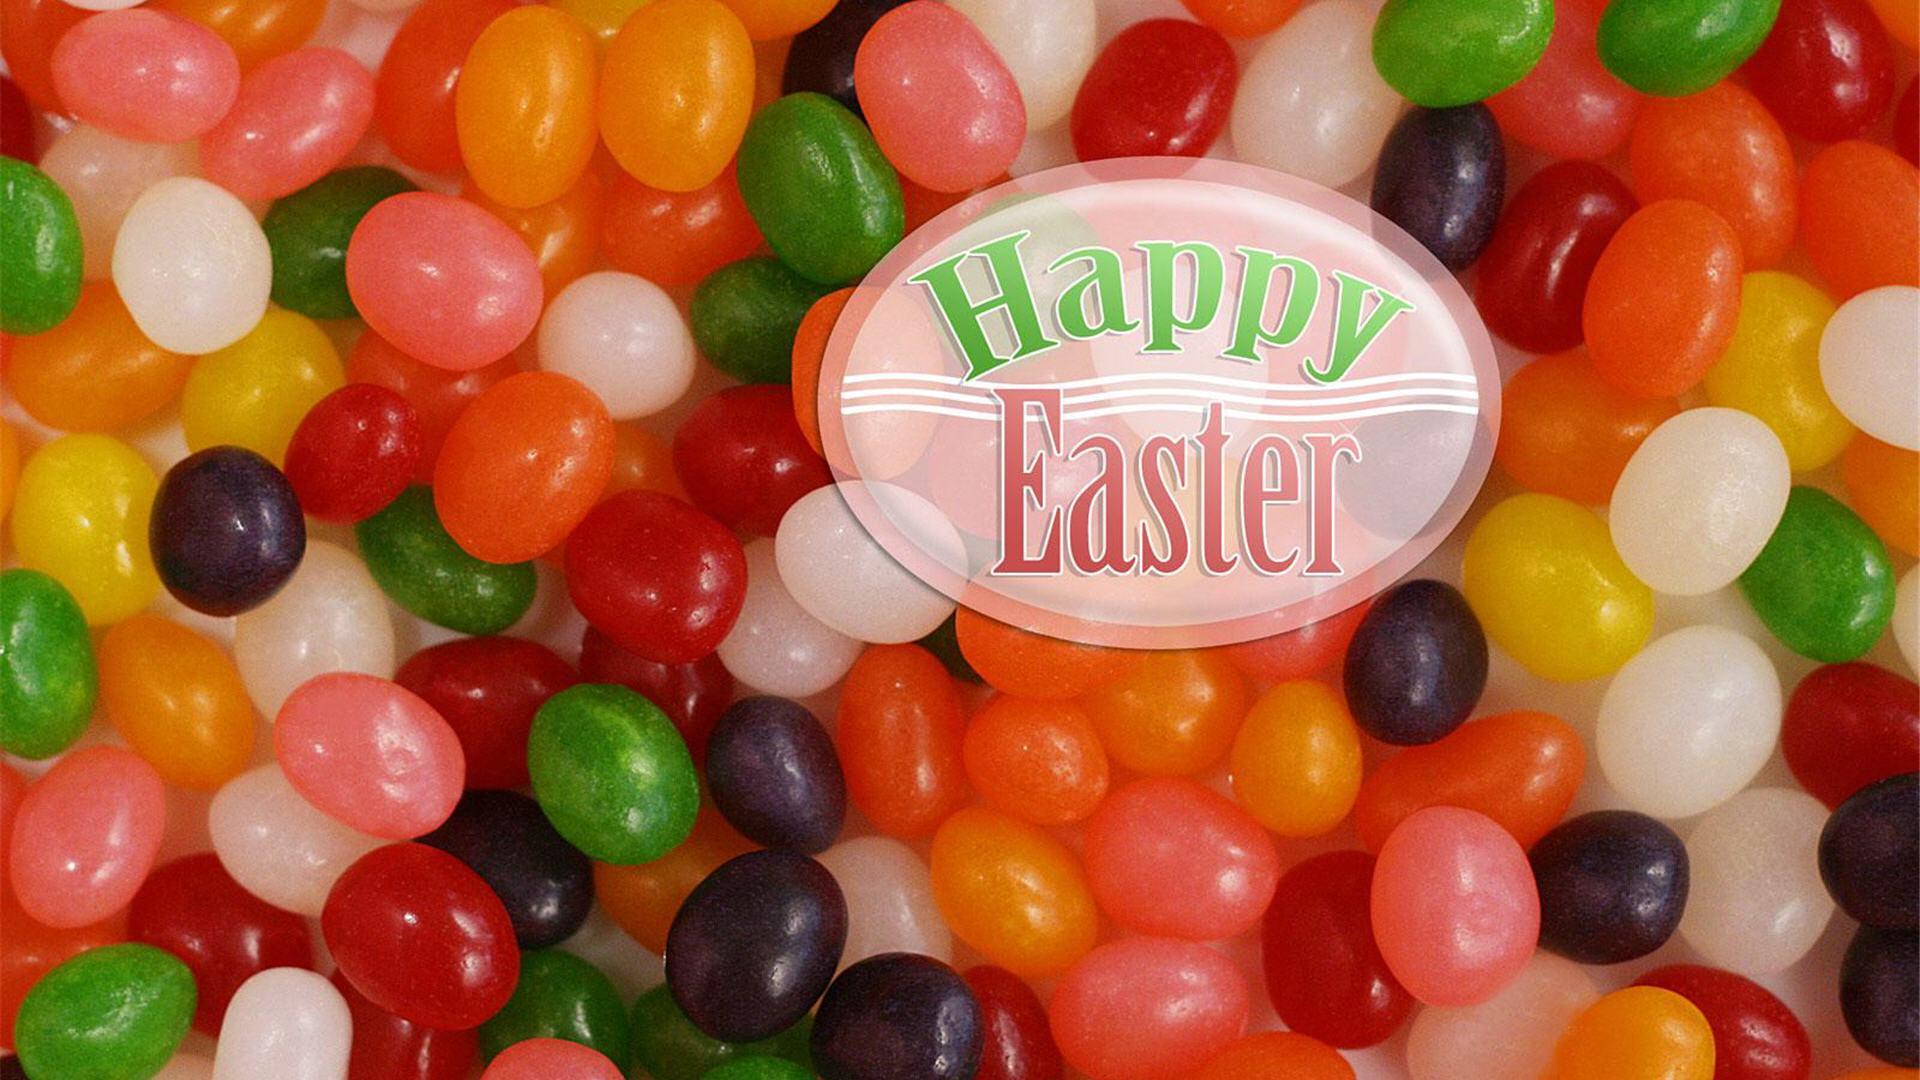 Easter Jelly Beans - Easter Candy Wallpaper Hd - HD Wallpaper 